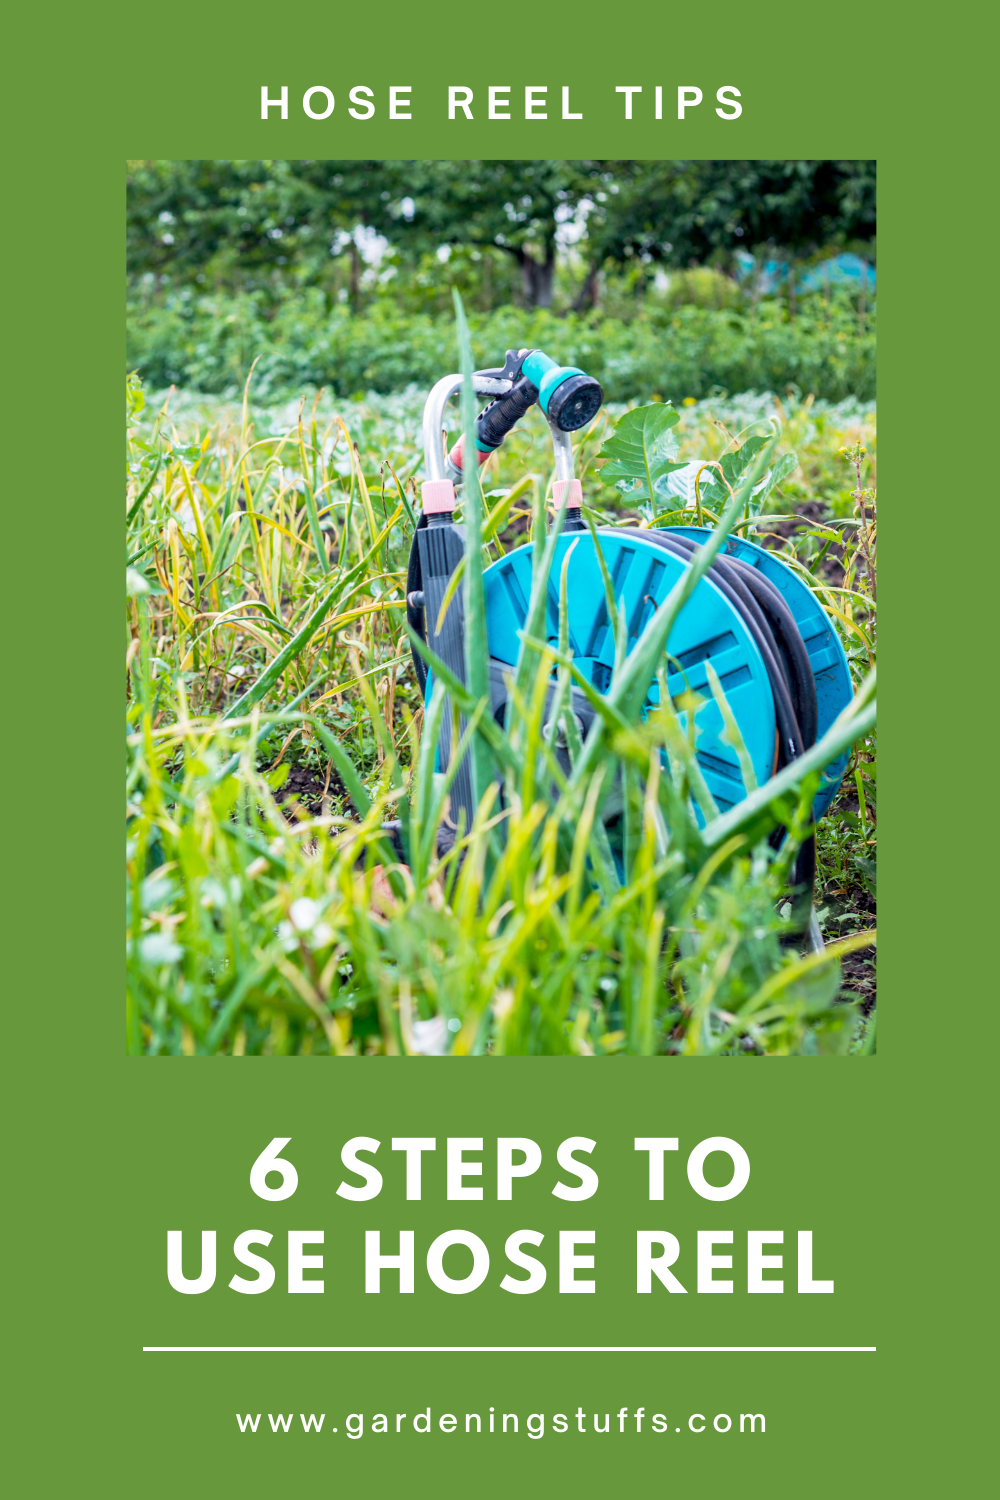 Check out our guide, these 6 steps are the complete instructions to use the hose reel and you will be able to understand it better while you are using it.